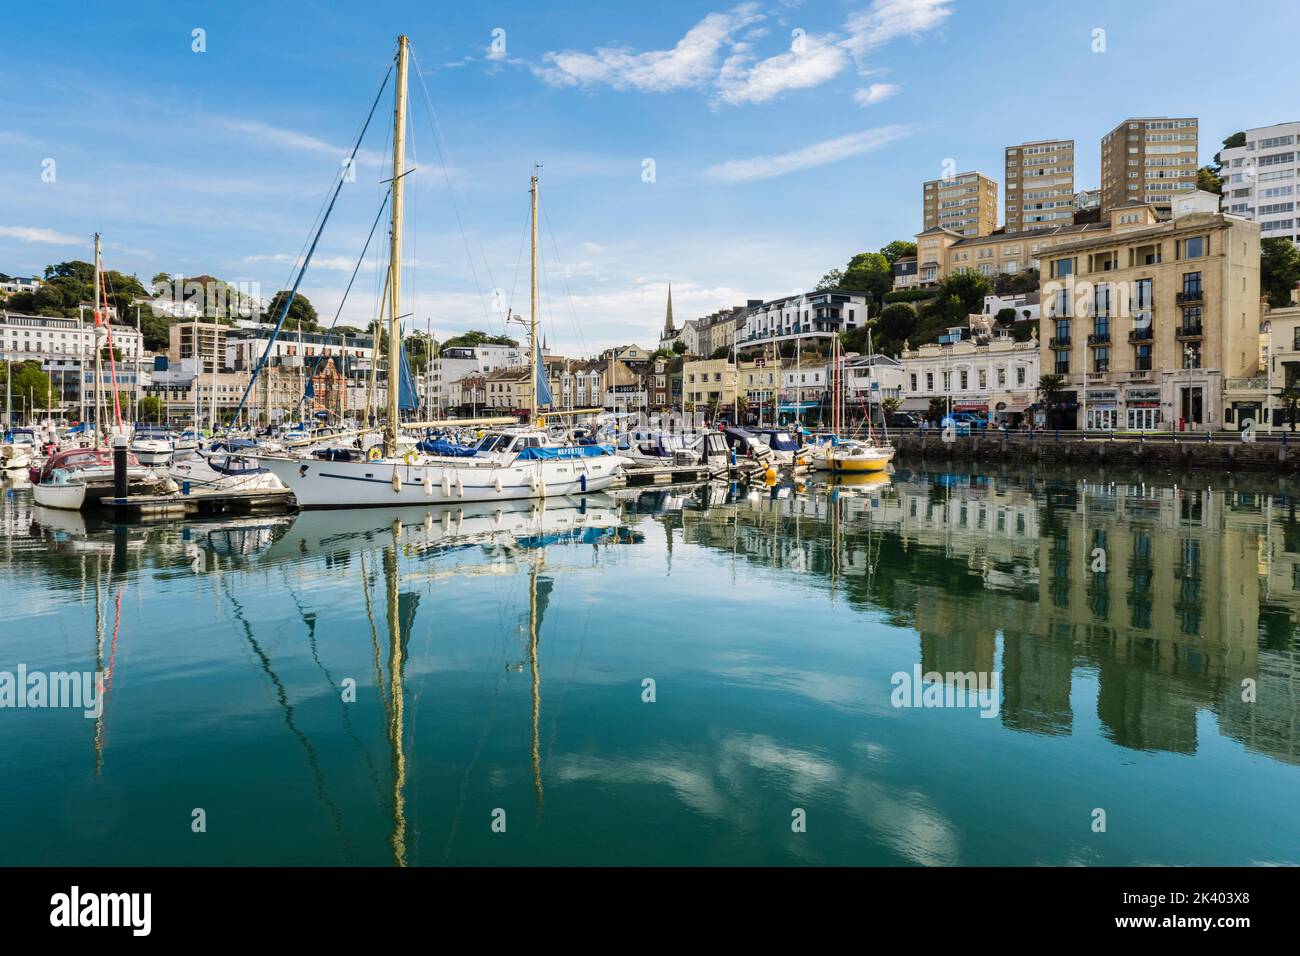 Boats moored in the harbour  reflected in the calm water of the Inner Dock. Torquay, Devon, England, UK, Britain Stock Photo